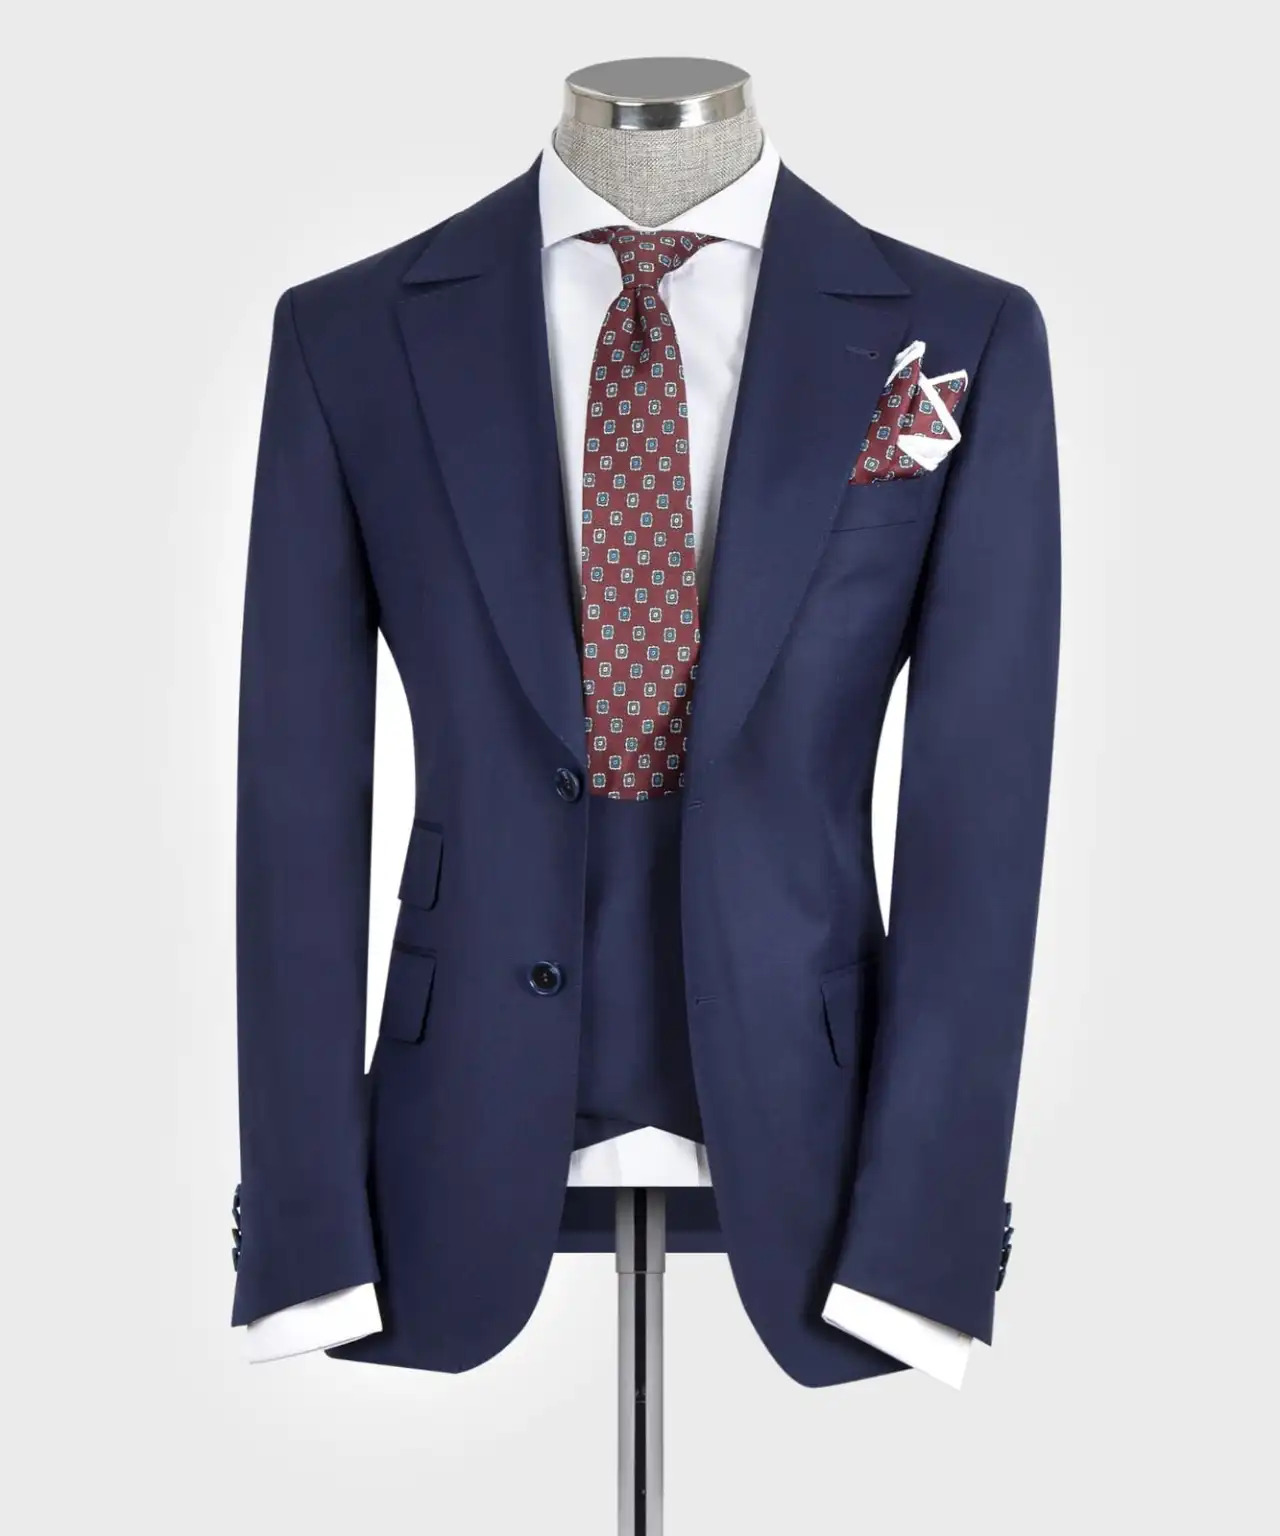 Liam Michael Made to Order Suit Style 8 - The Gentlemens Closet